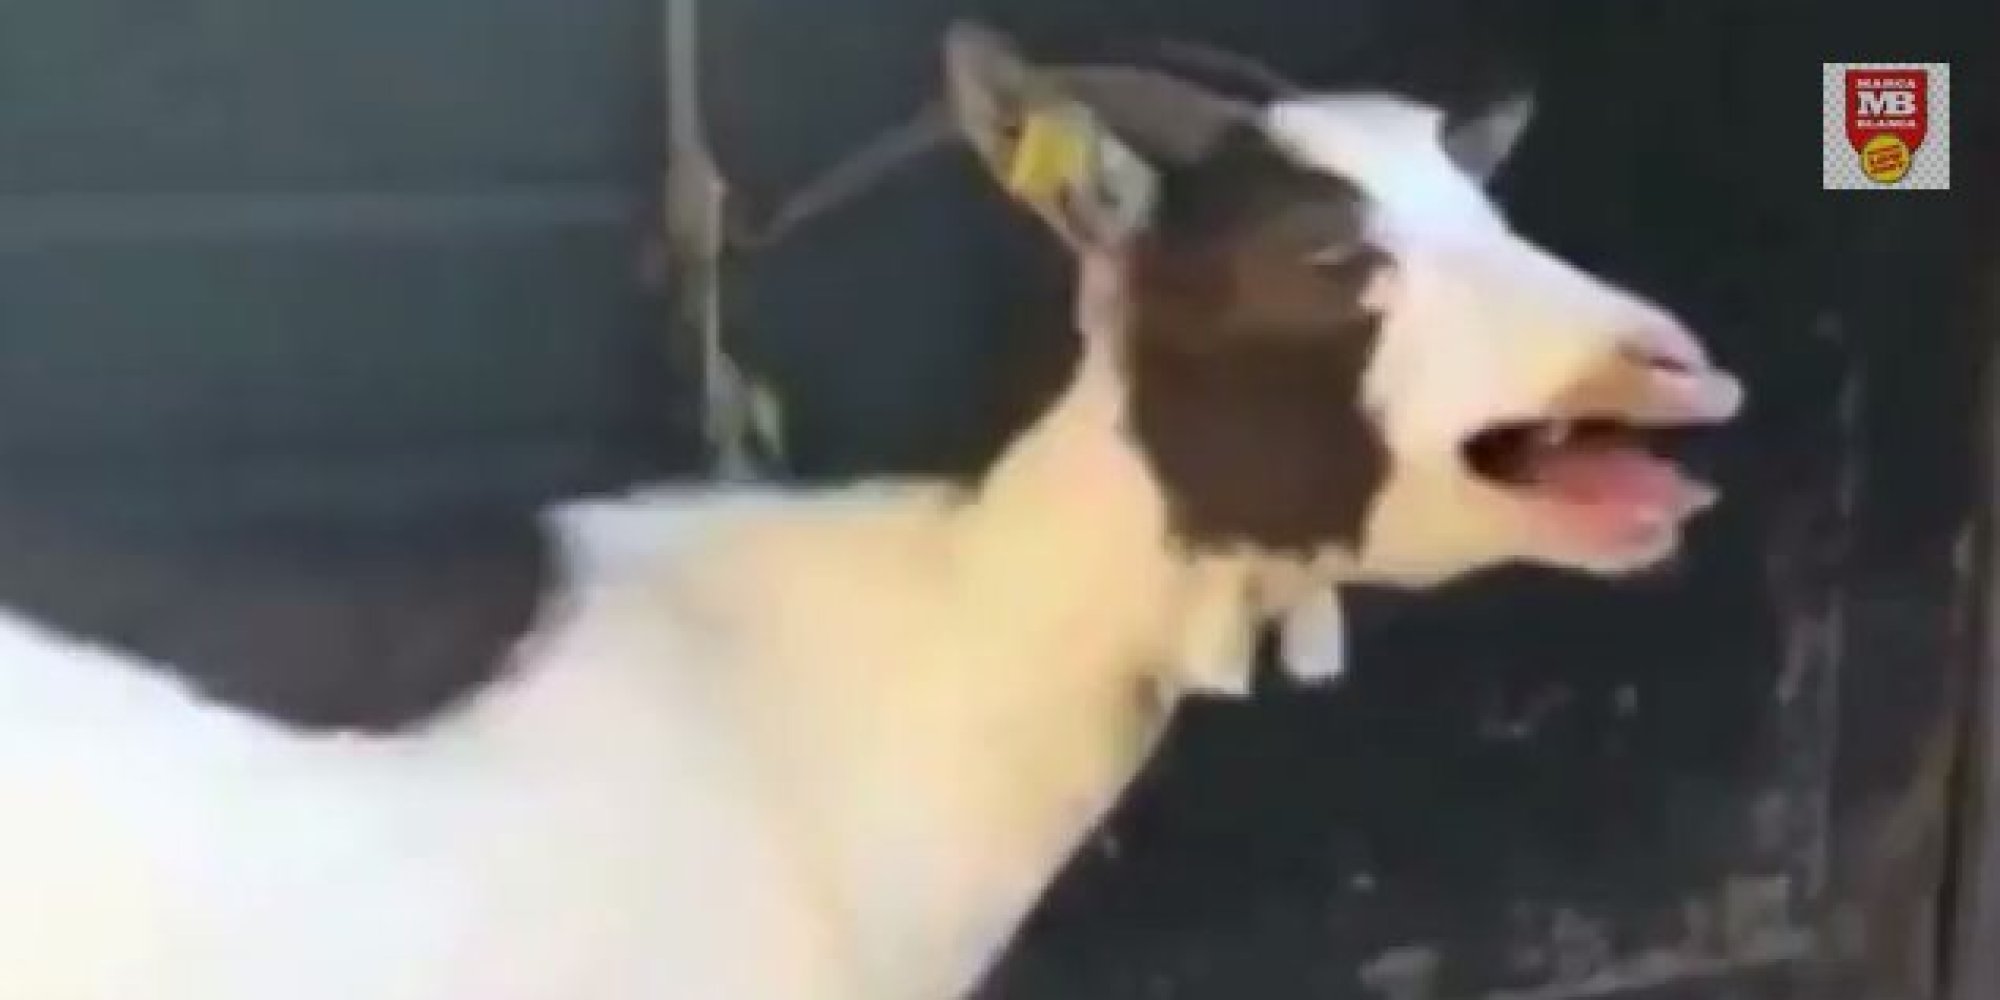 Jurassic Goat: It's The 'Jurassic Park' Theme Tune Performed By Goats (VIDEO)2000 x 1000